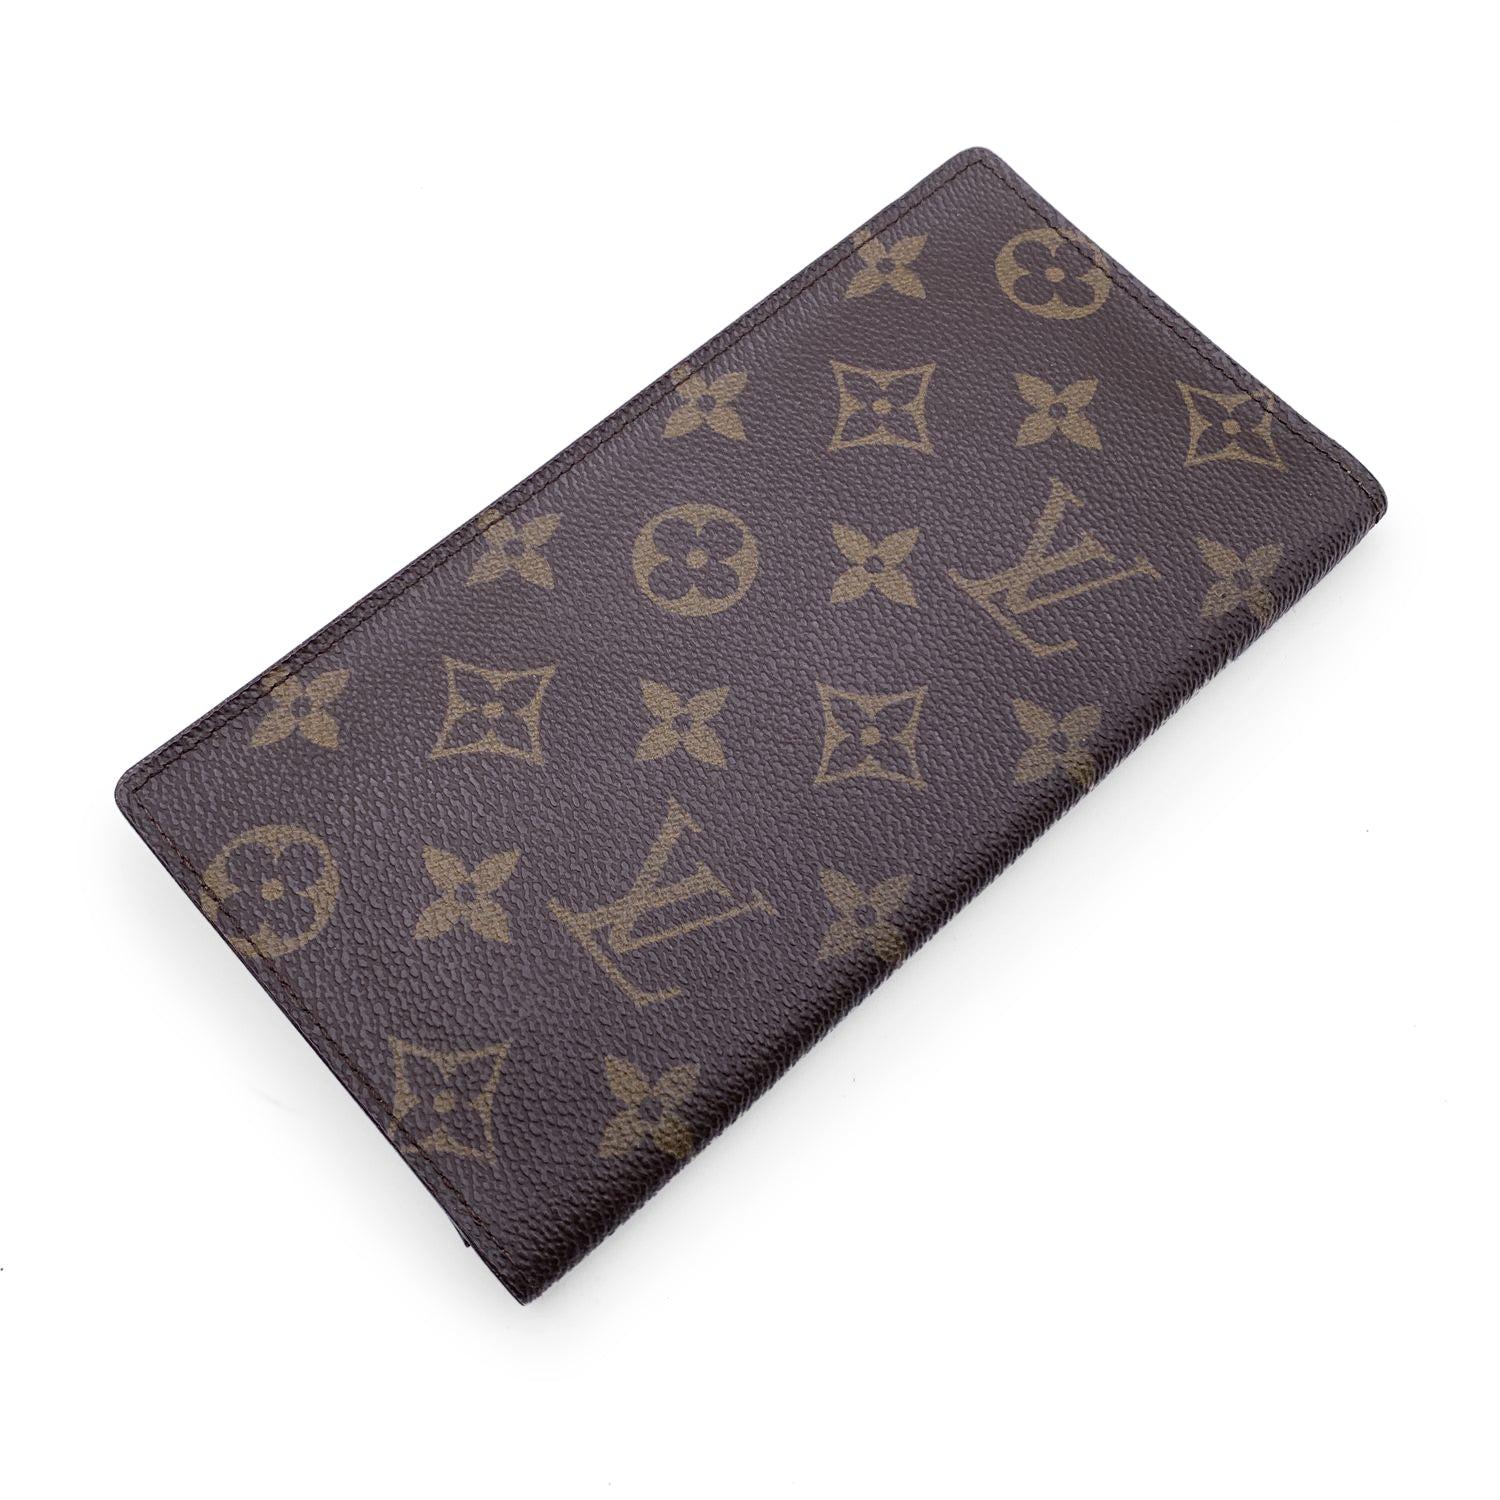 Louis Vuitton Brown Monogram Vertical Wallet. Brown leather inside. 3 side pockets and 6 credit card slots inside. 'LOUIS VUITTON Paris - Made in France' engraved on leather inside. Authenticity serial number embossed inside Details MATERIAL: Cloth